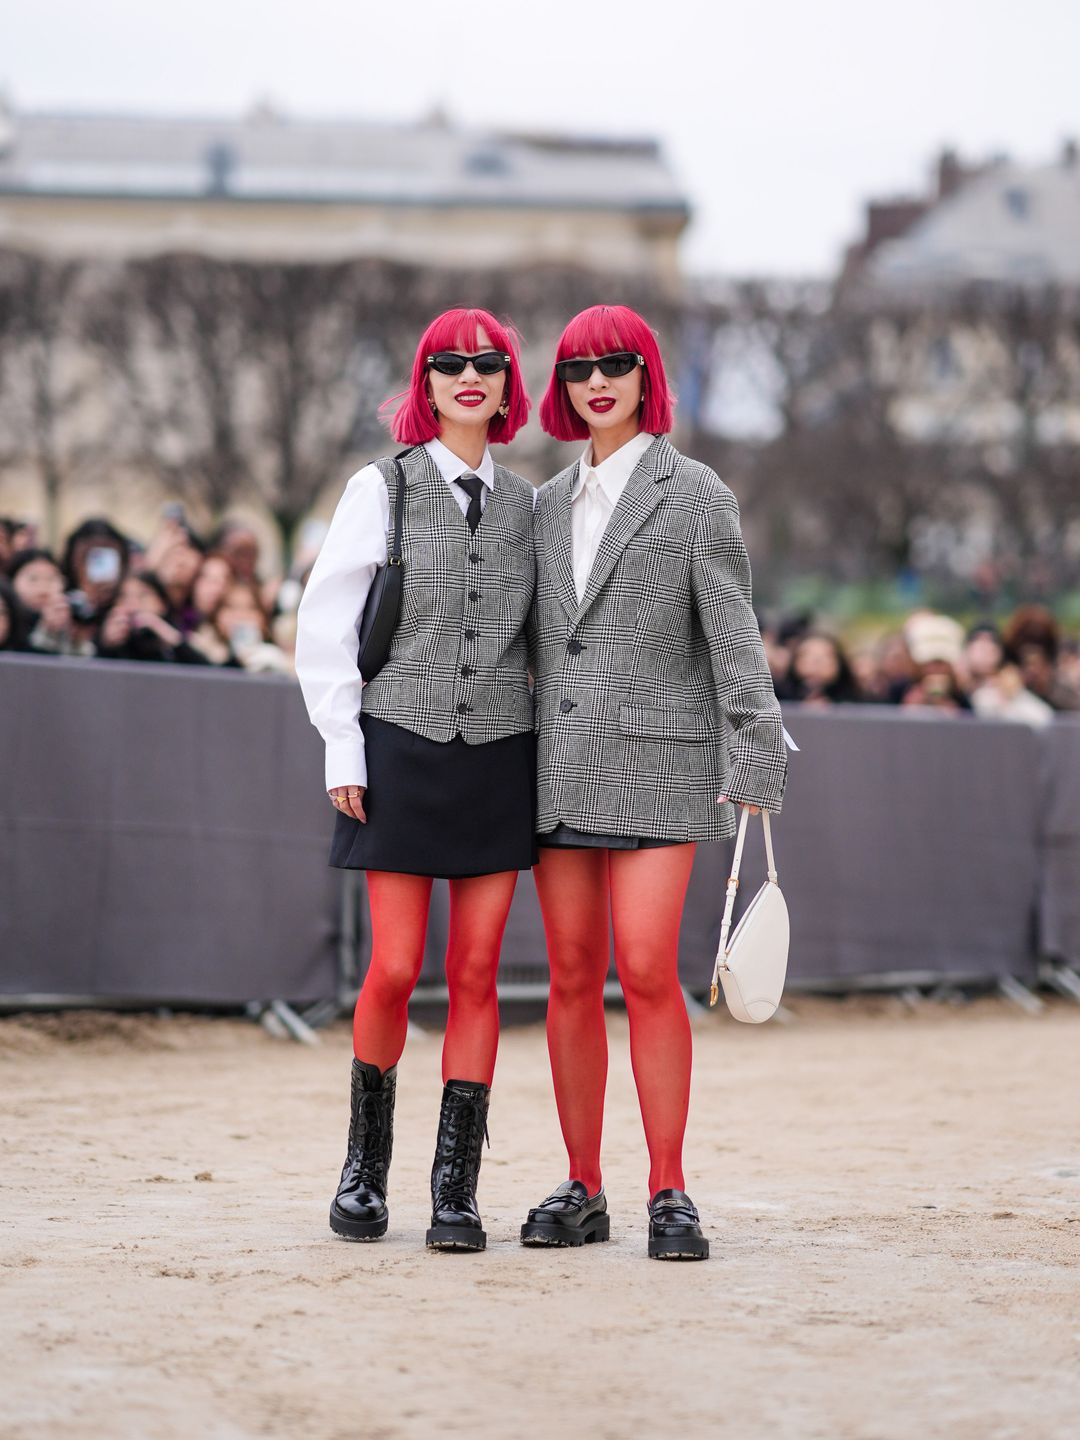 Ami and Aya are seen ; a guest wears sunglasses, red lipstick, a white shirt, a gray houndstooth printed pattern oversized blazer jacket , a mini skirt, red tights, a Dior bag, leather shoes ; a guest wears a waistcoat, outside Dior